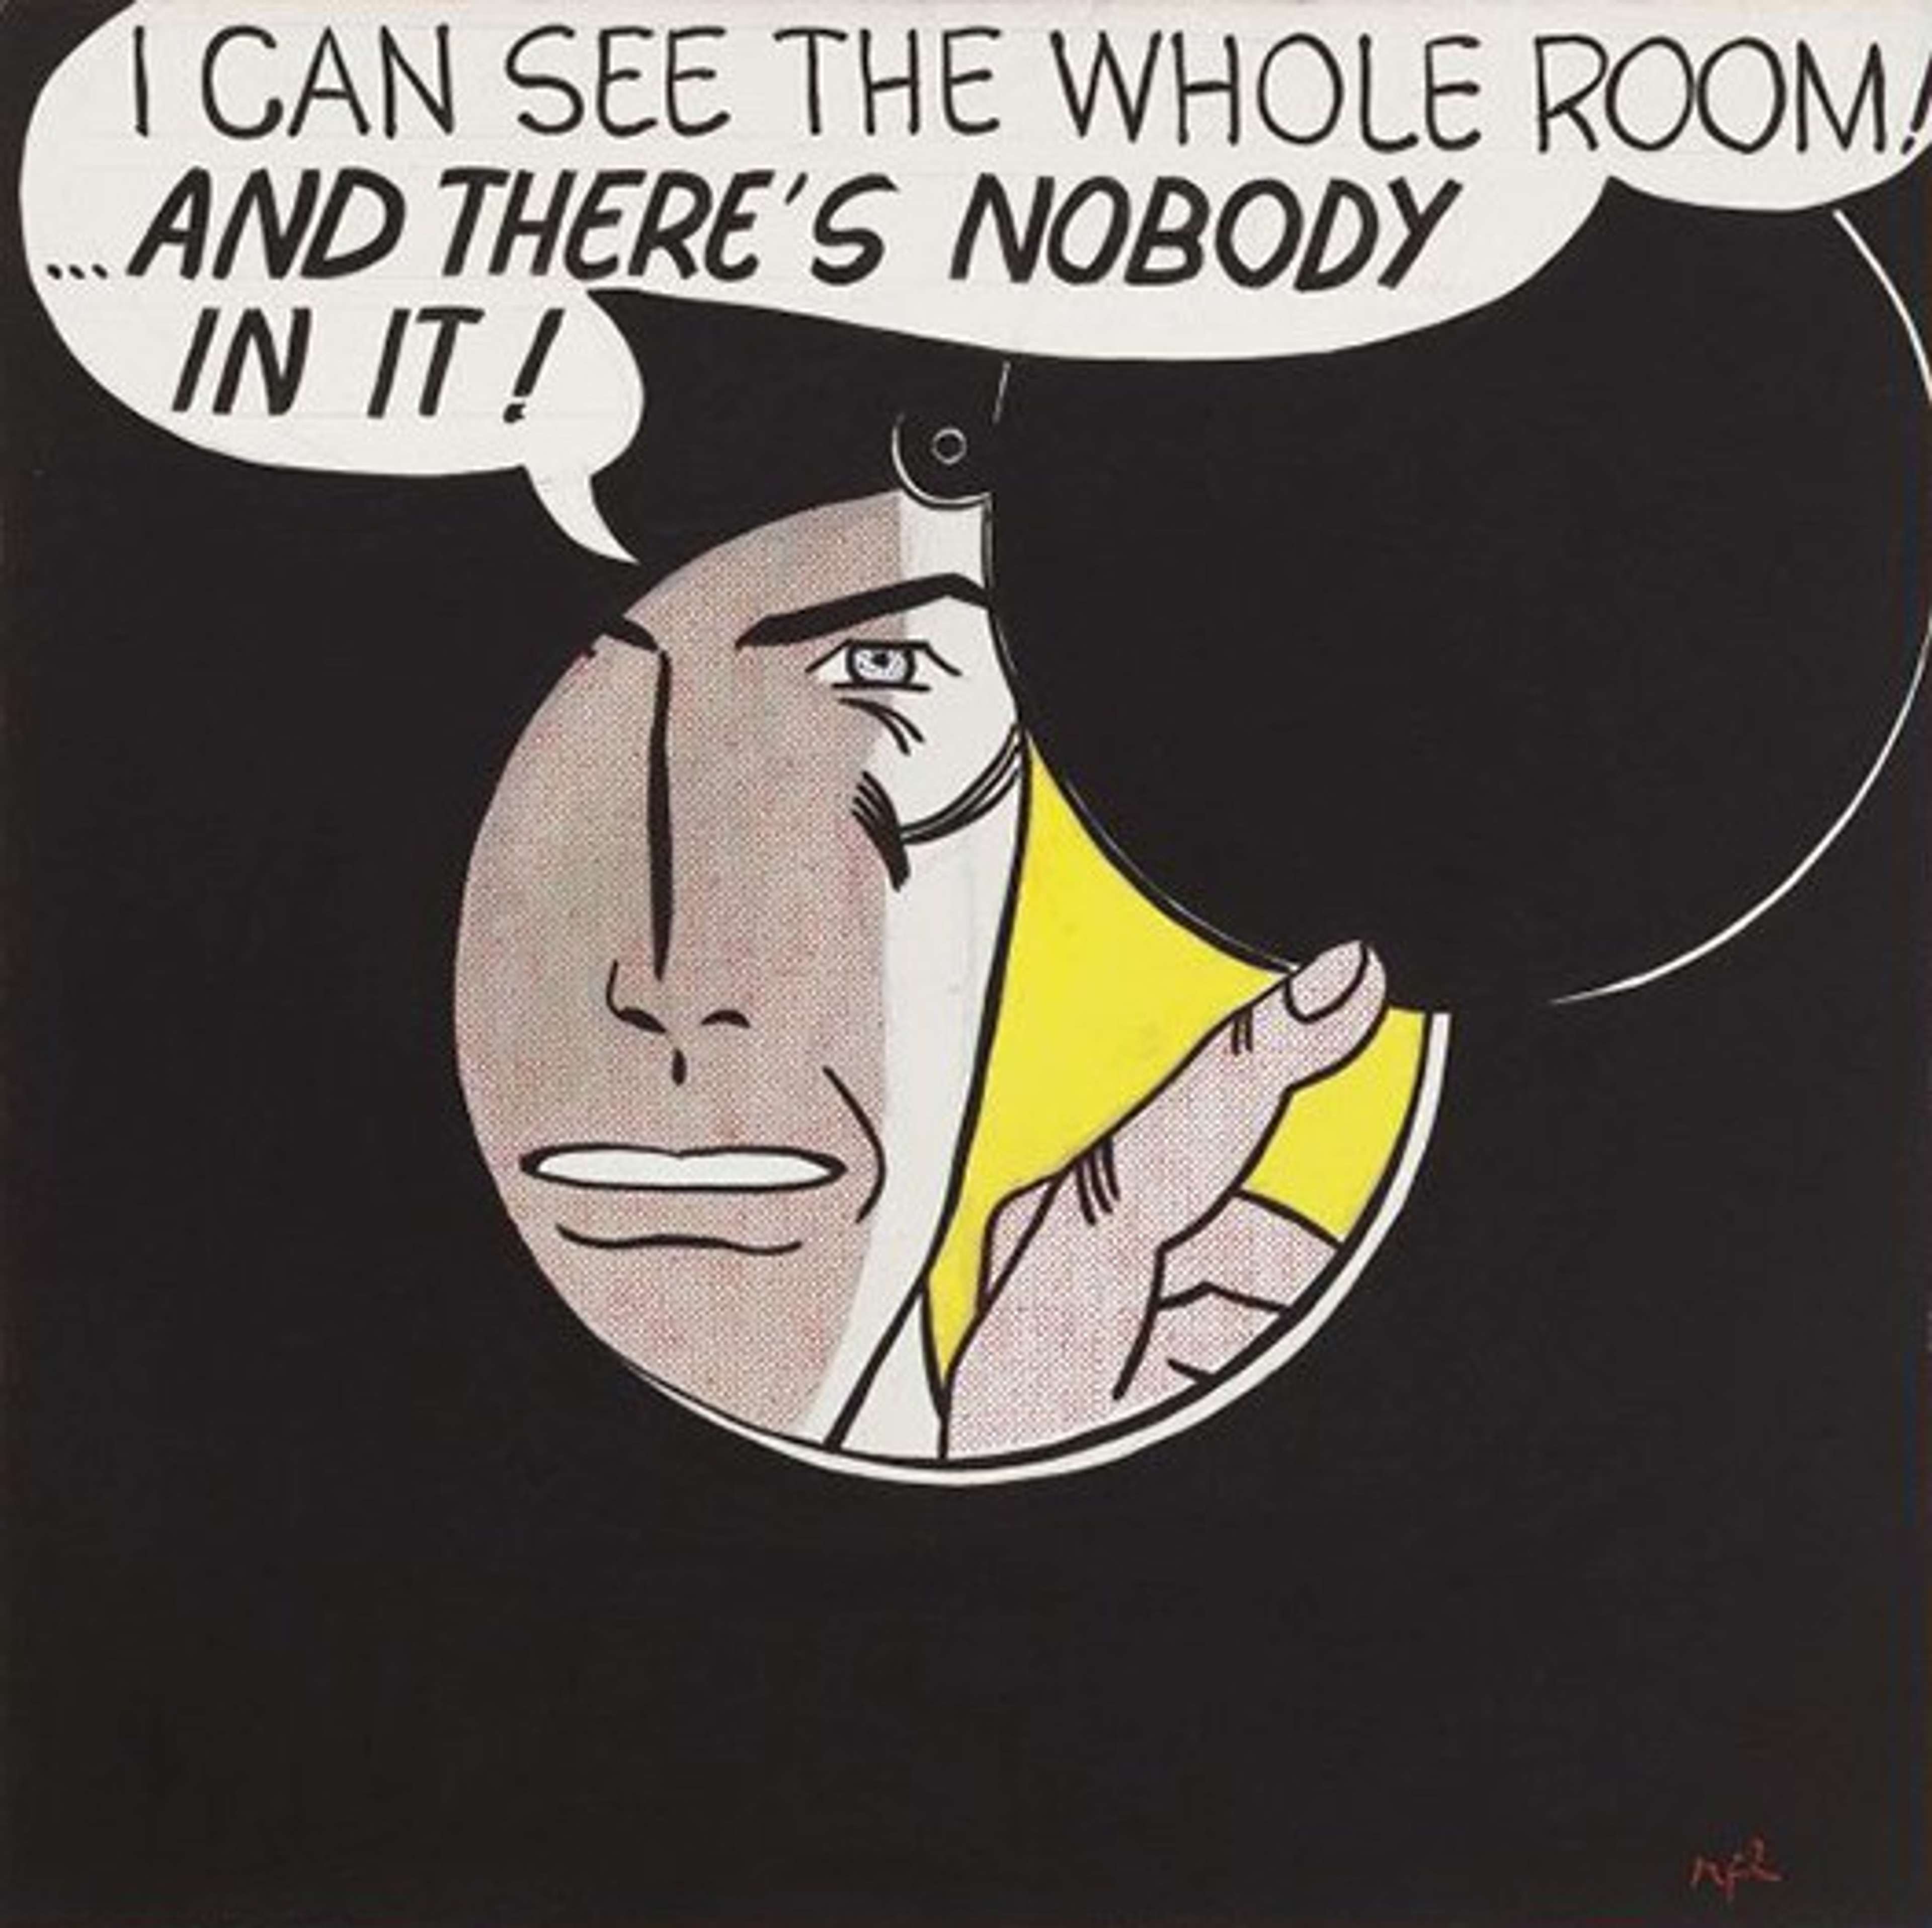 I Can See The Whole Room!…And There’s Nobody in it! by Roy Lichtenstein